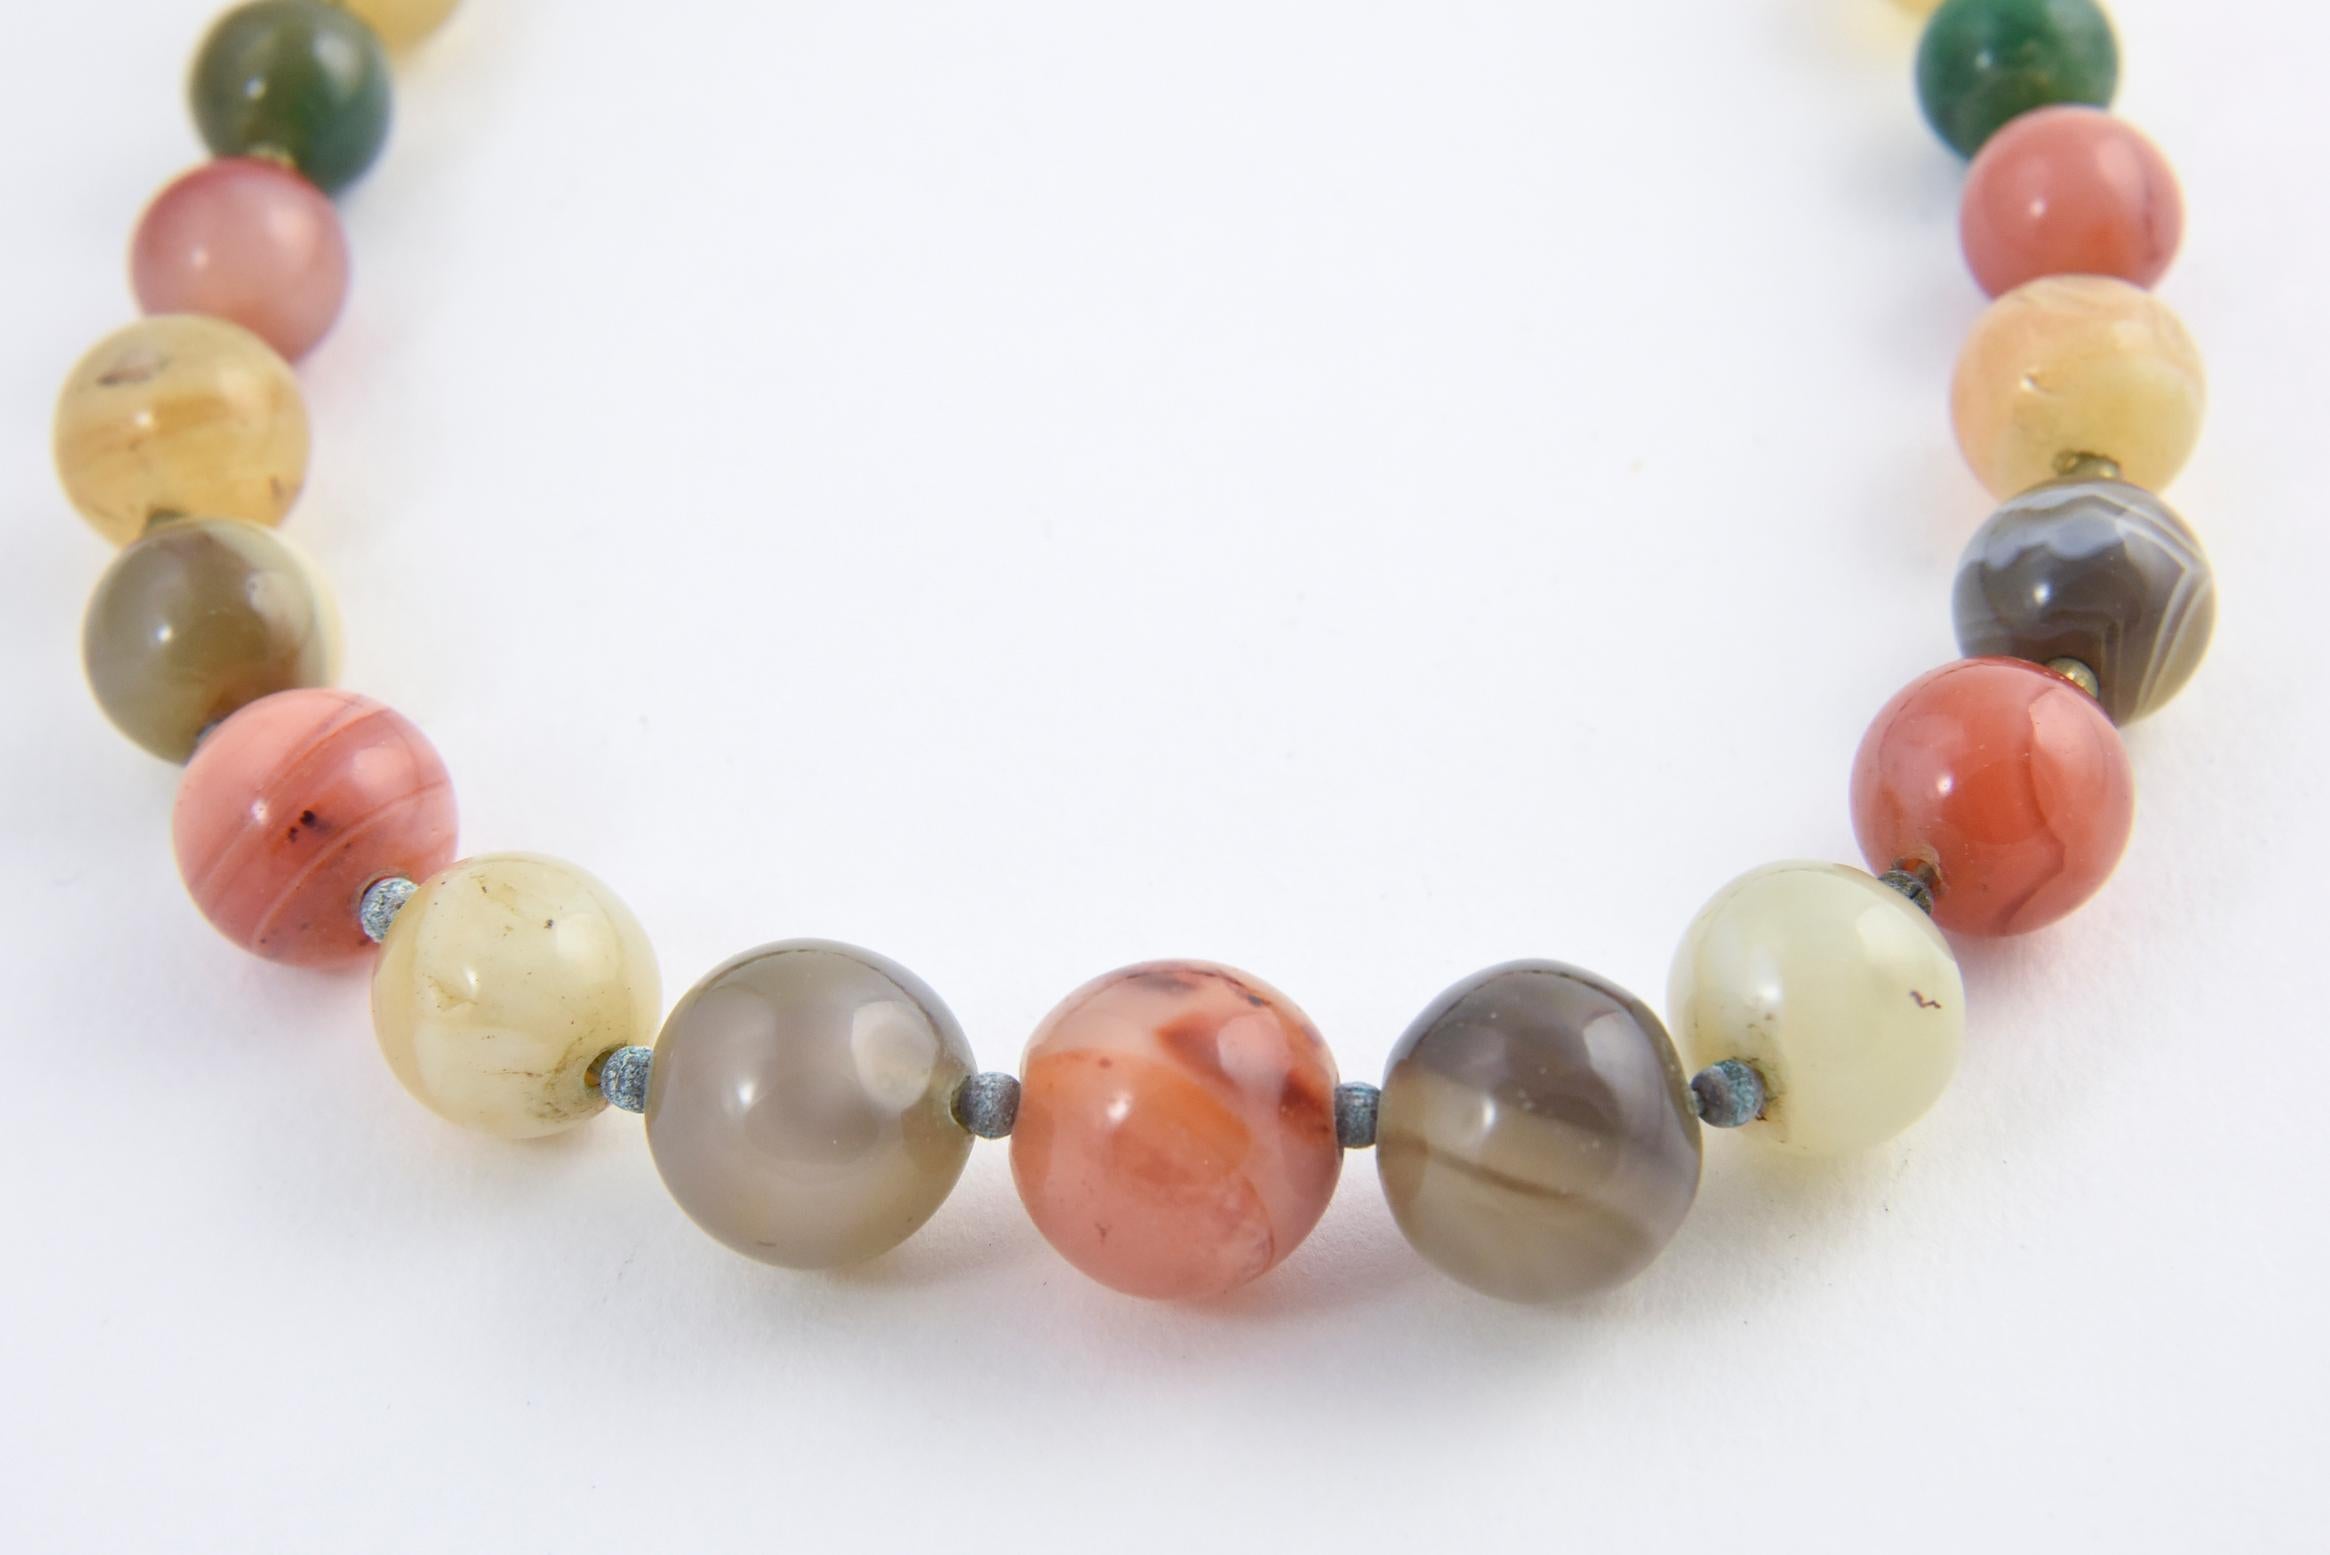 Multicolored agate bead necklace with four aventurine quartz accent beads, brass bead spacers, and clasp. Beads range from 10.5mm to 17.30mm. Tarnish on brass beads. No maker's mark.
